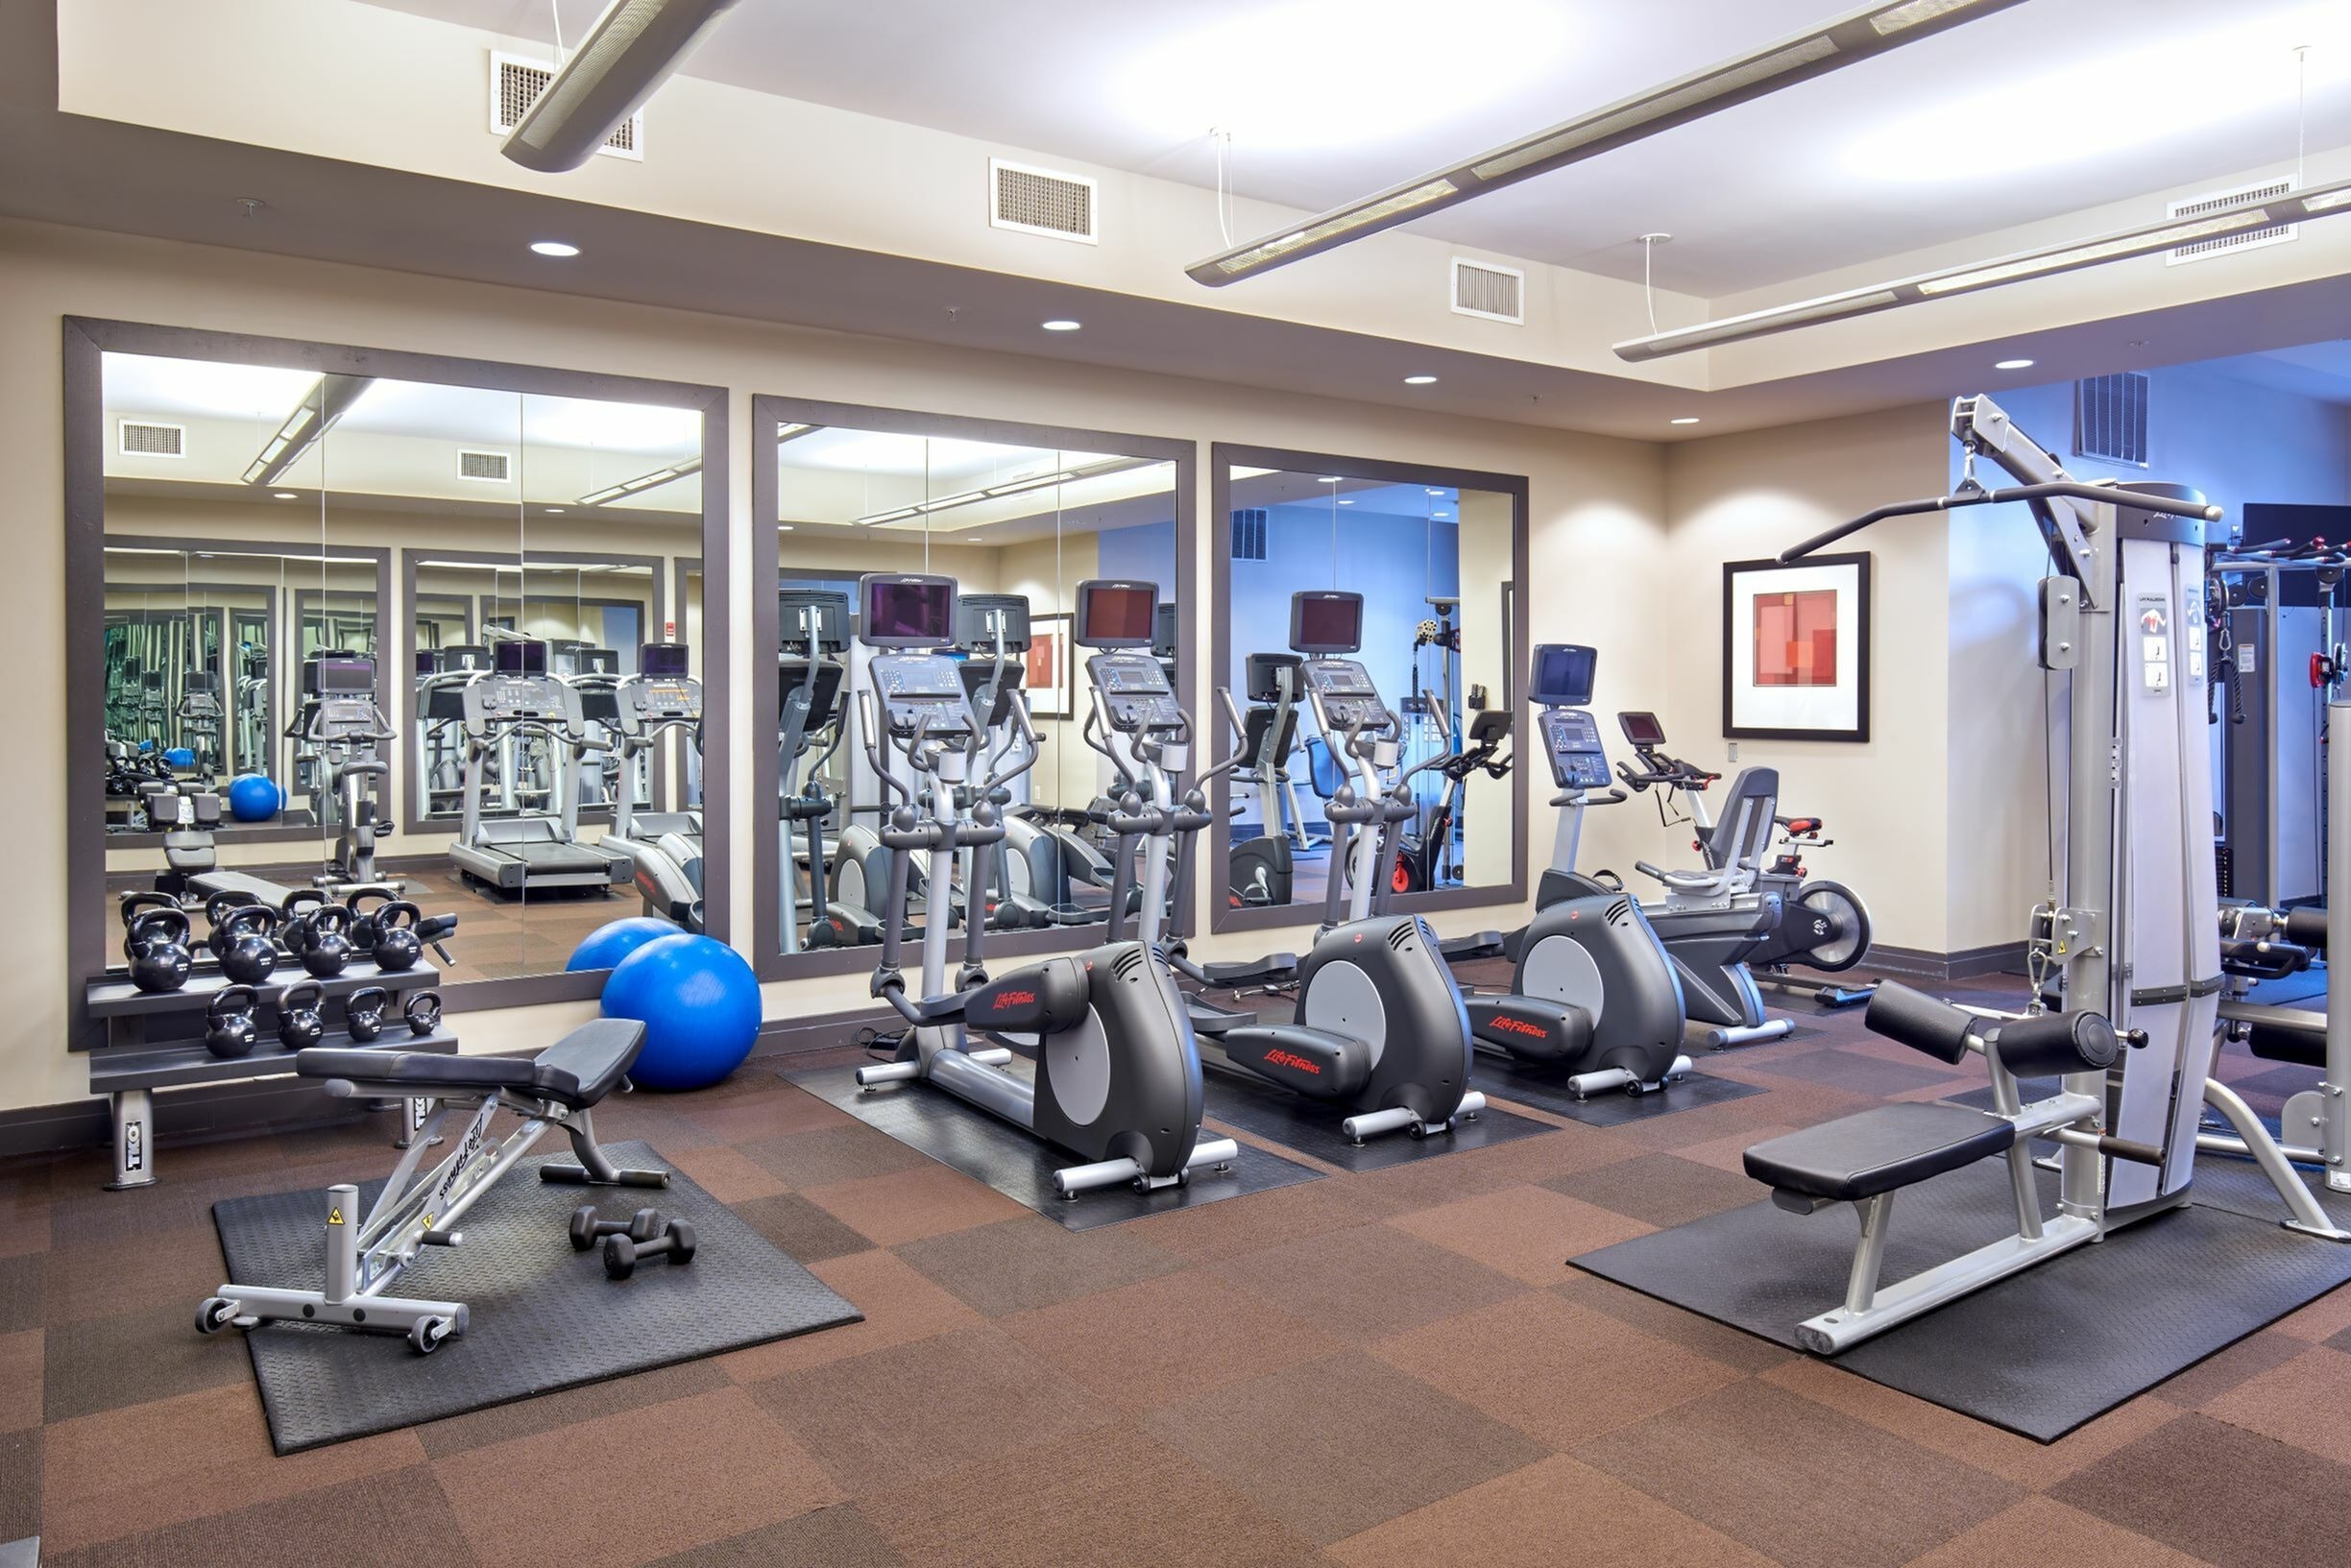 Fitness Center With Cardio, Weight Machines & Free Weights